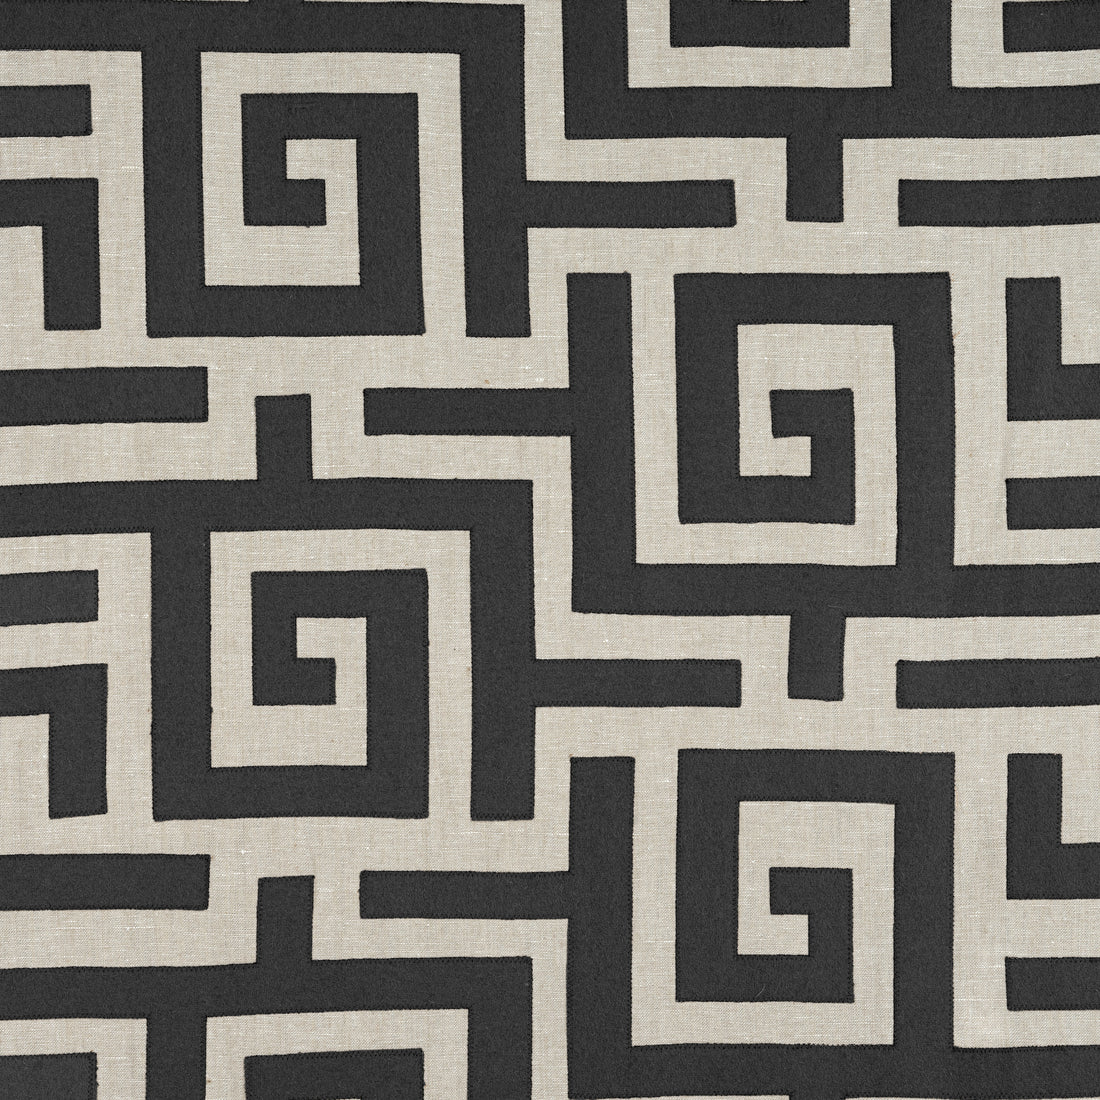 Tulum Applique fabric in black on natural color - pattern number W713221 - by Thibaut in the Mesa collection